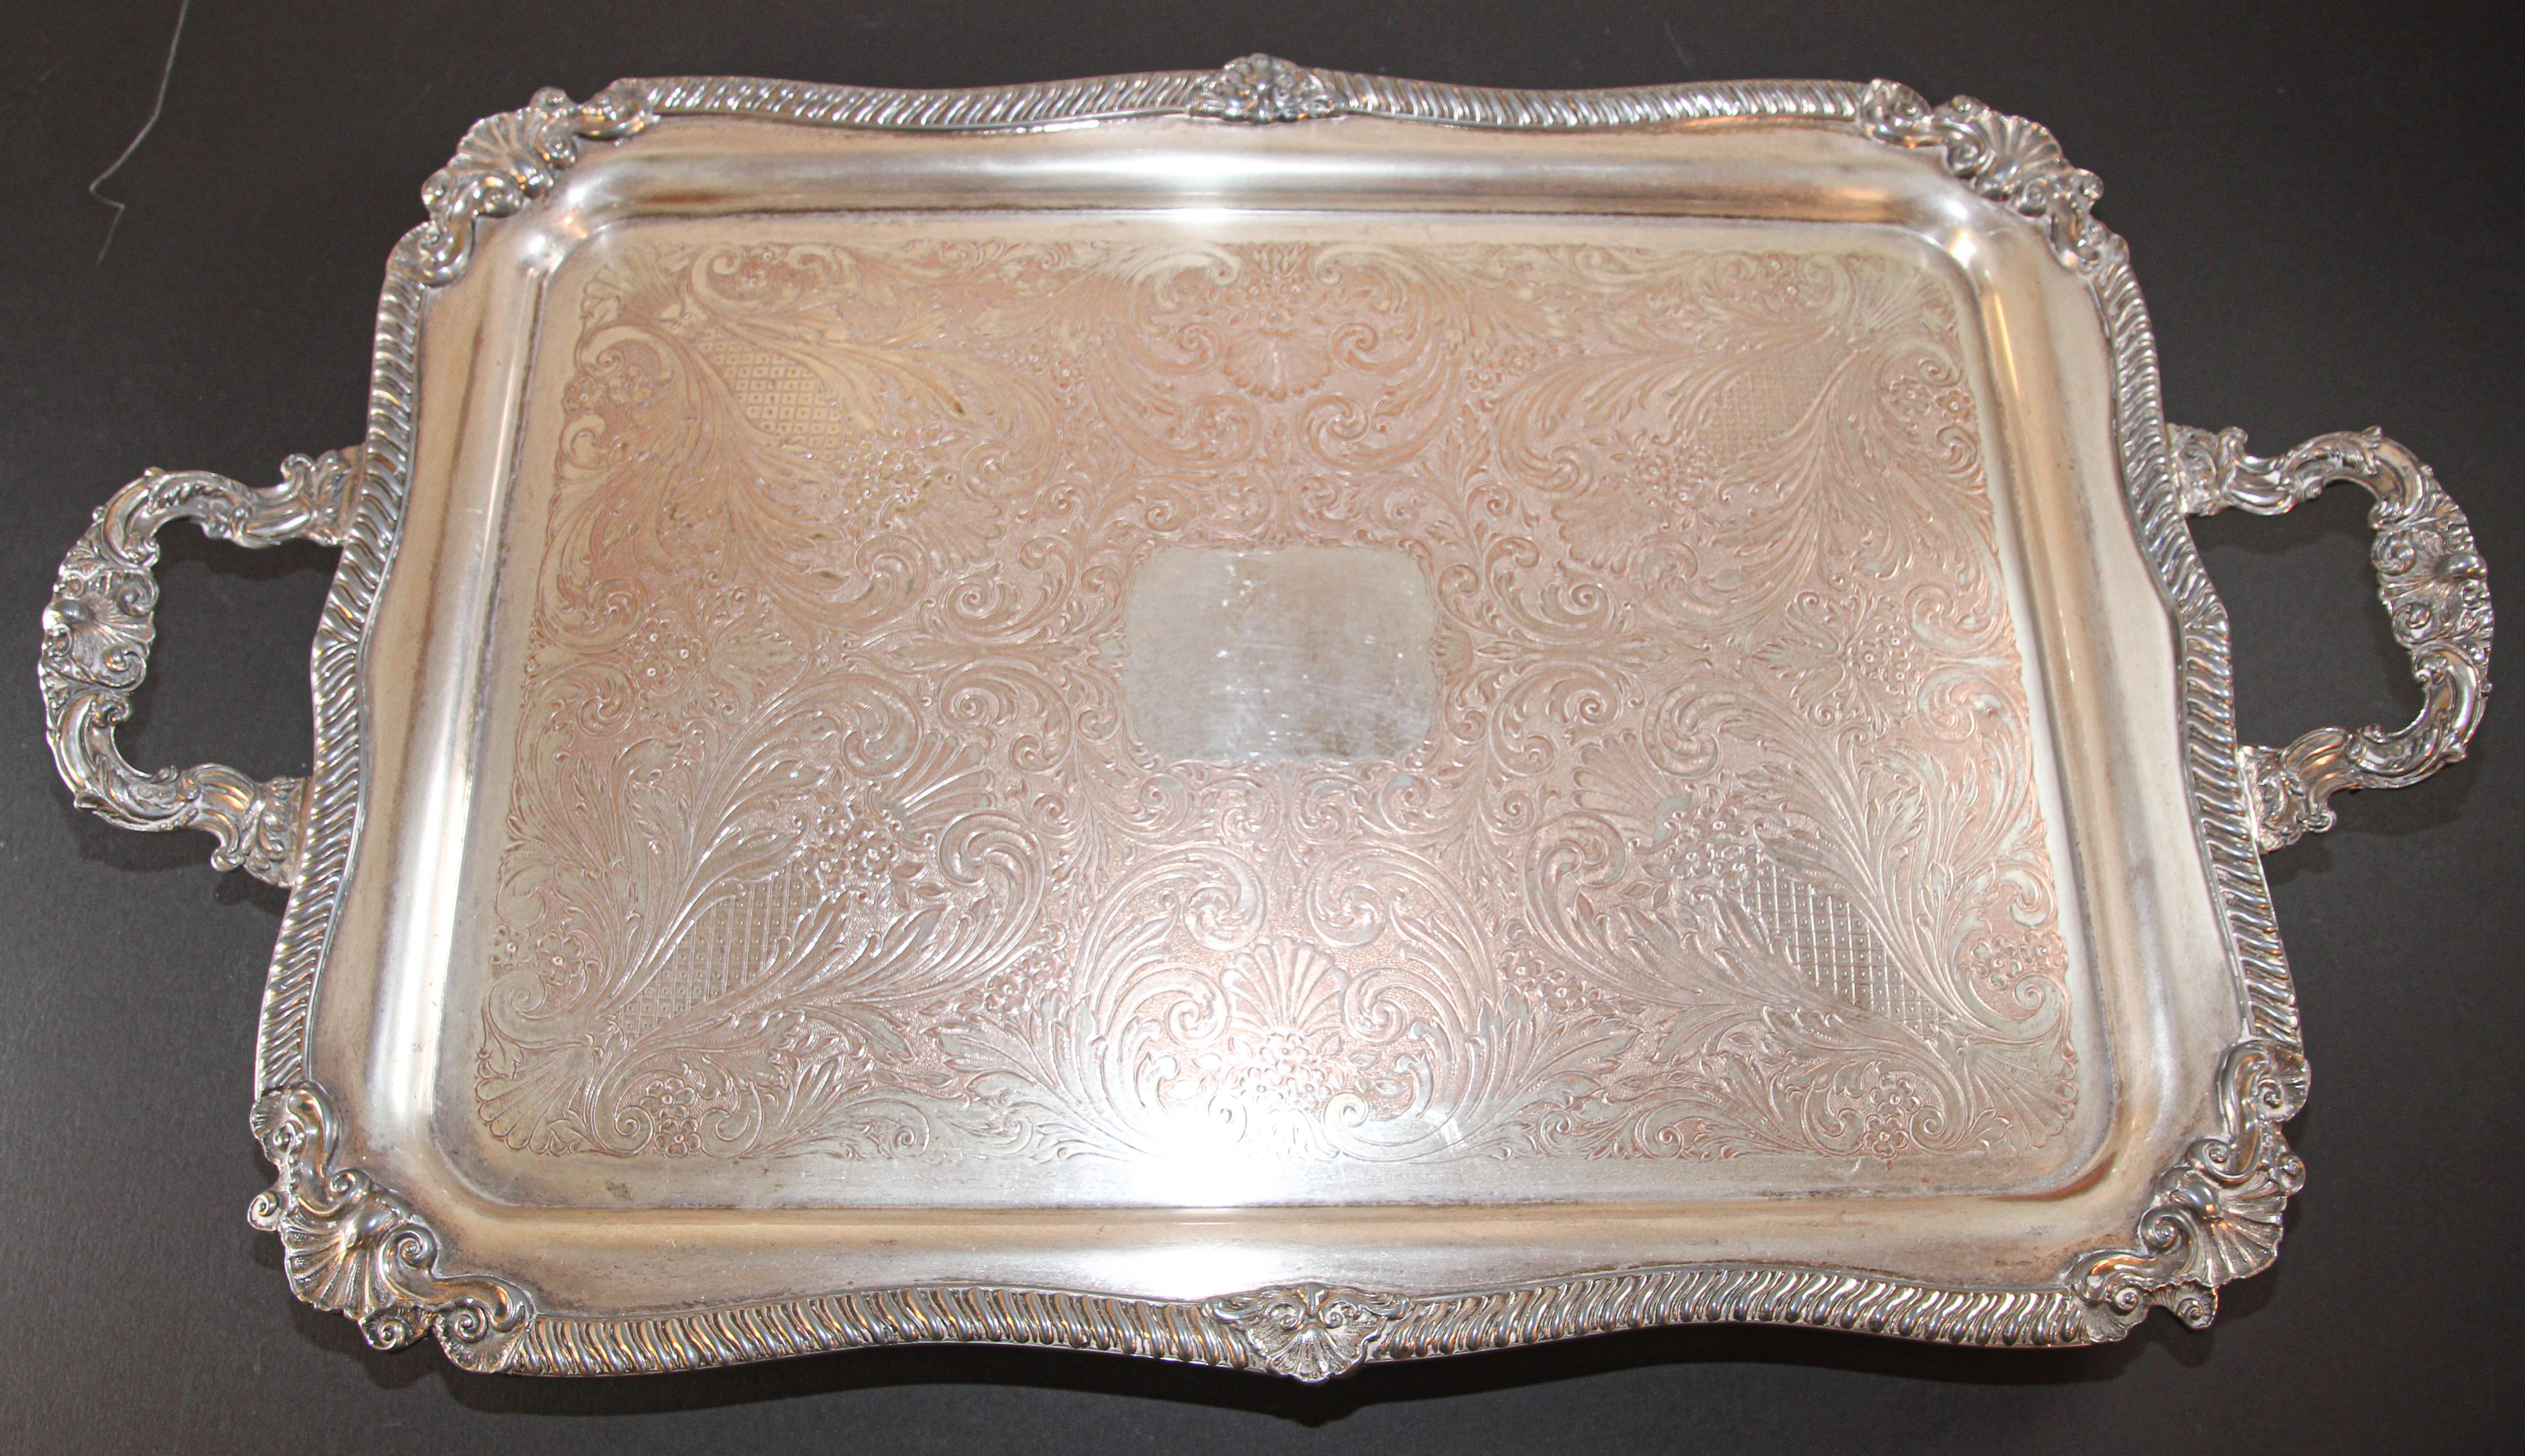 Vintage large silver plate tray George IV English style
A magnificent, fine and impressive vintage George IV English style plated silver tea tray.
This magnificent antique look George IV style silver plated tea tray has a rectangular shaped form